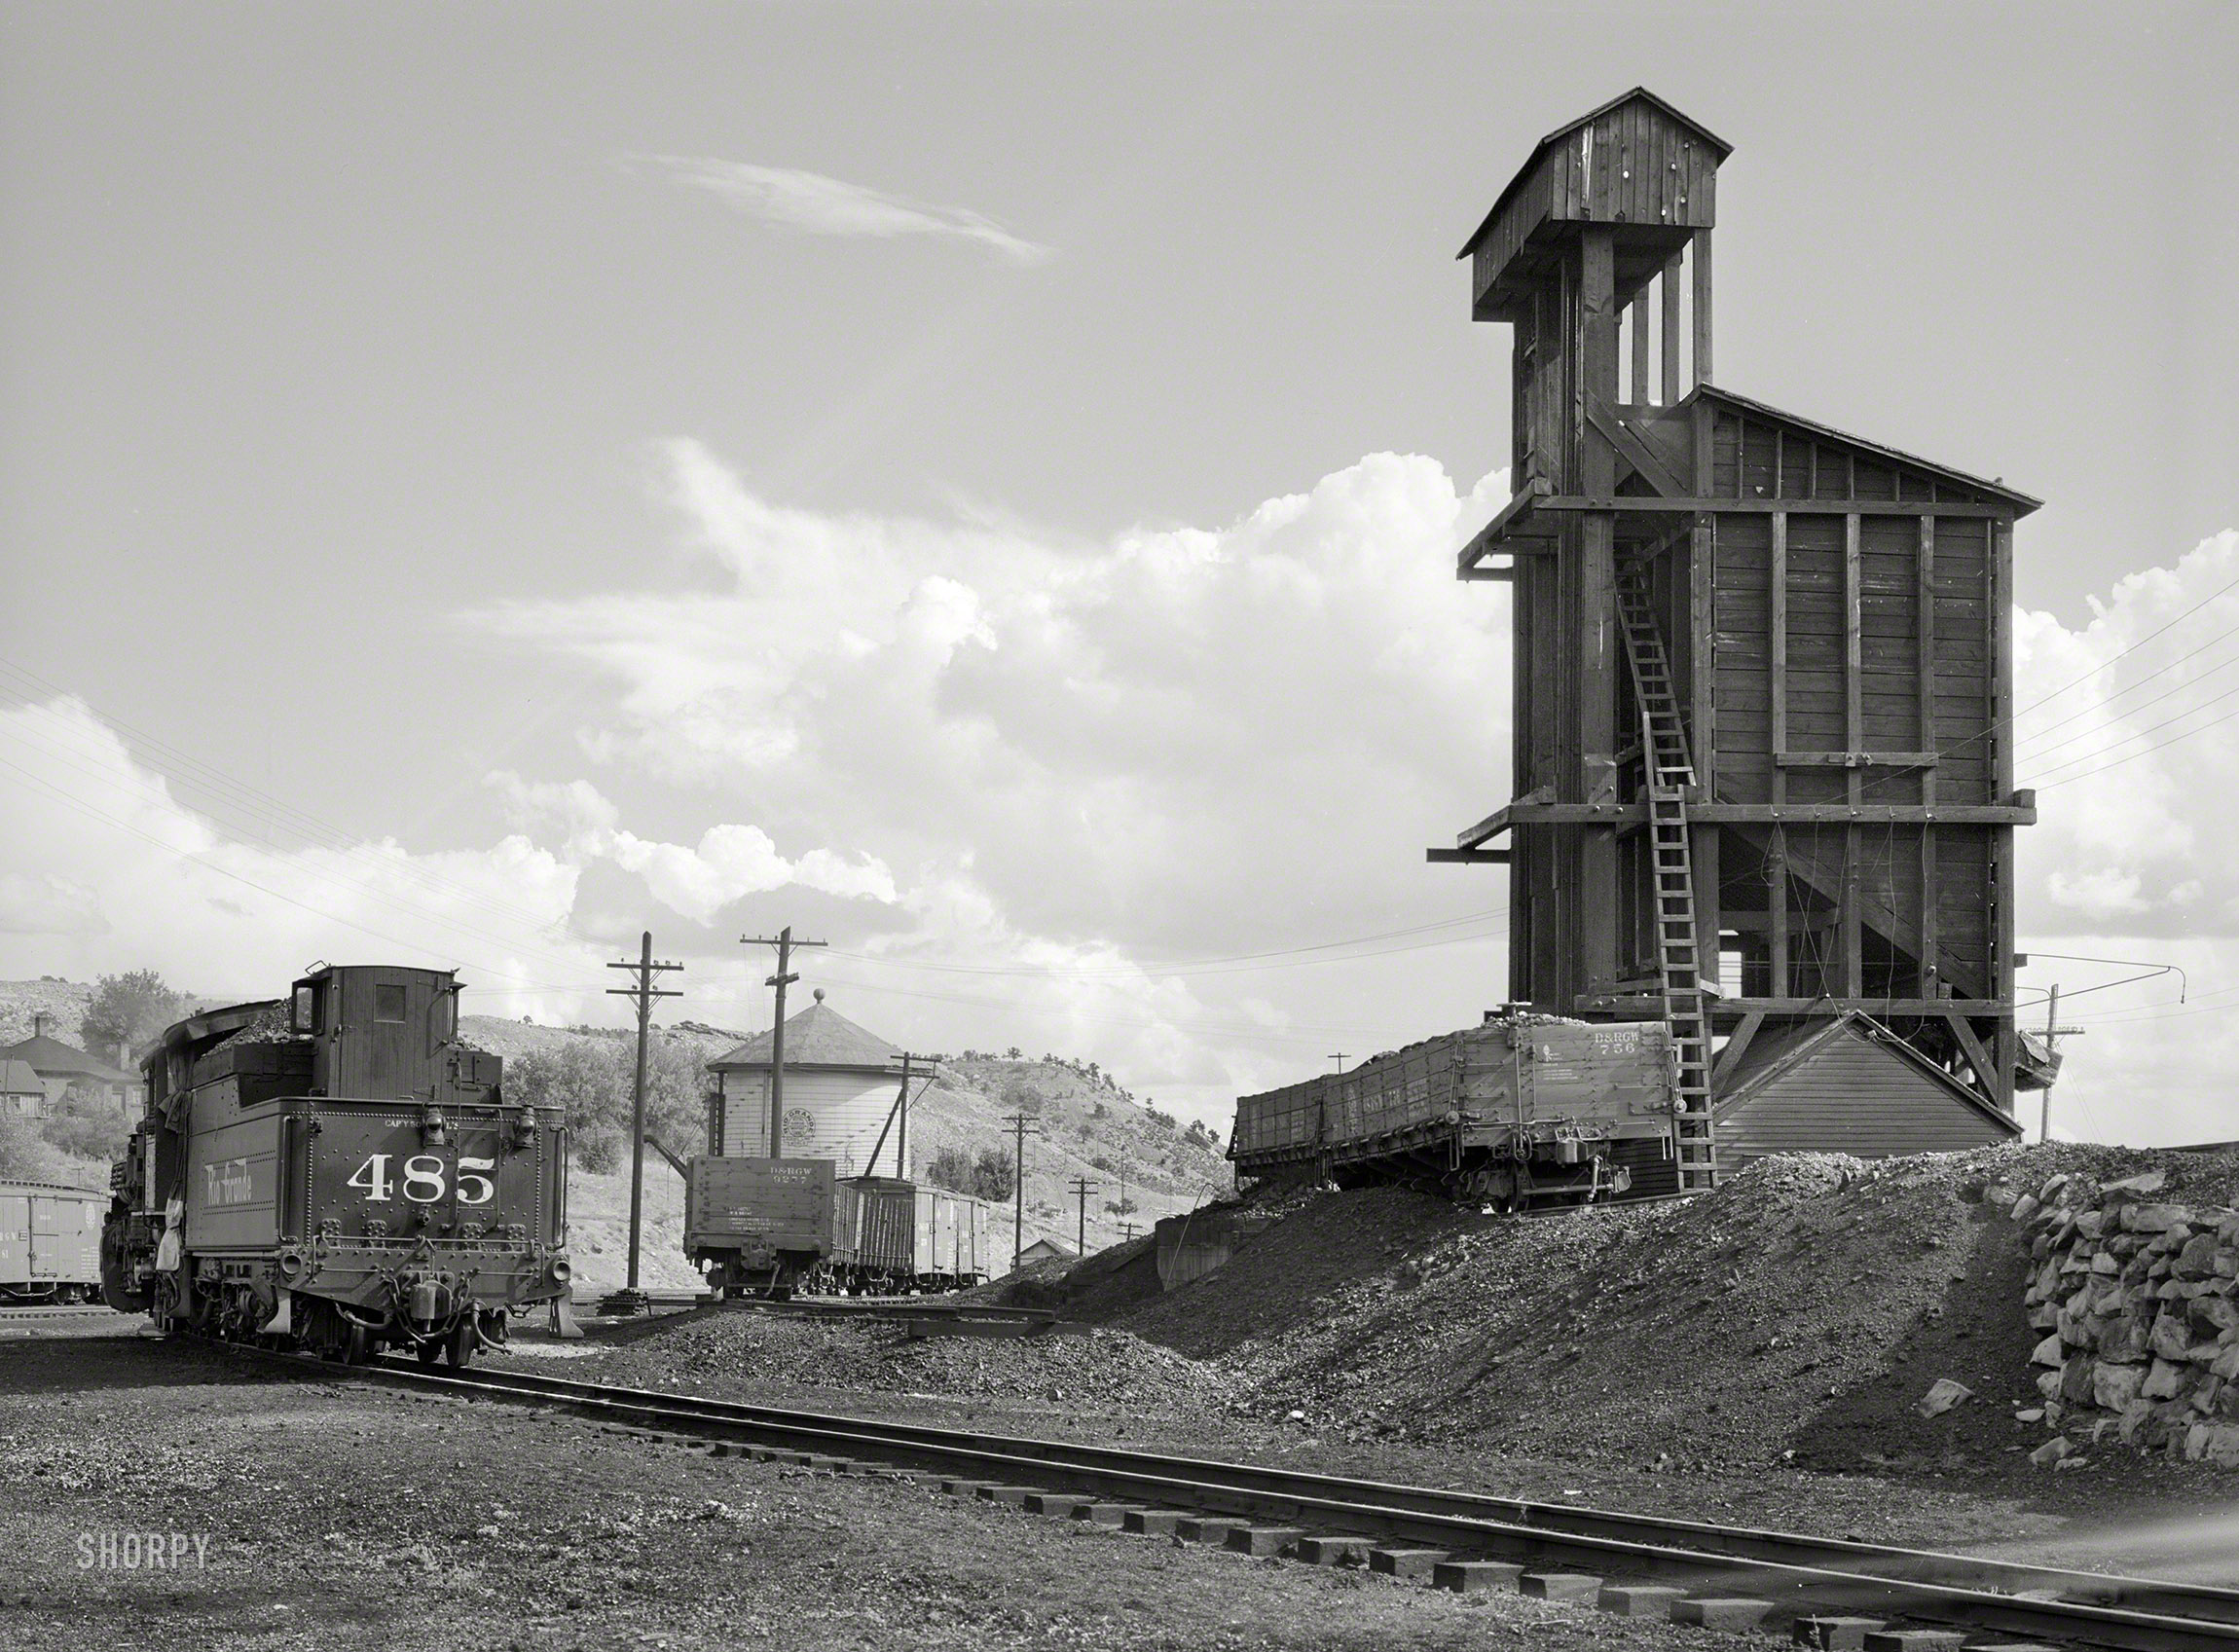 September 1940. "Railroad yards. Durango, Colorado." Medium format negative by Russell Lee for the Farm Security Administration. View full size.